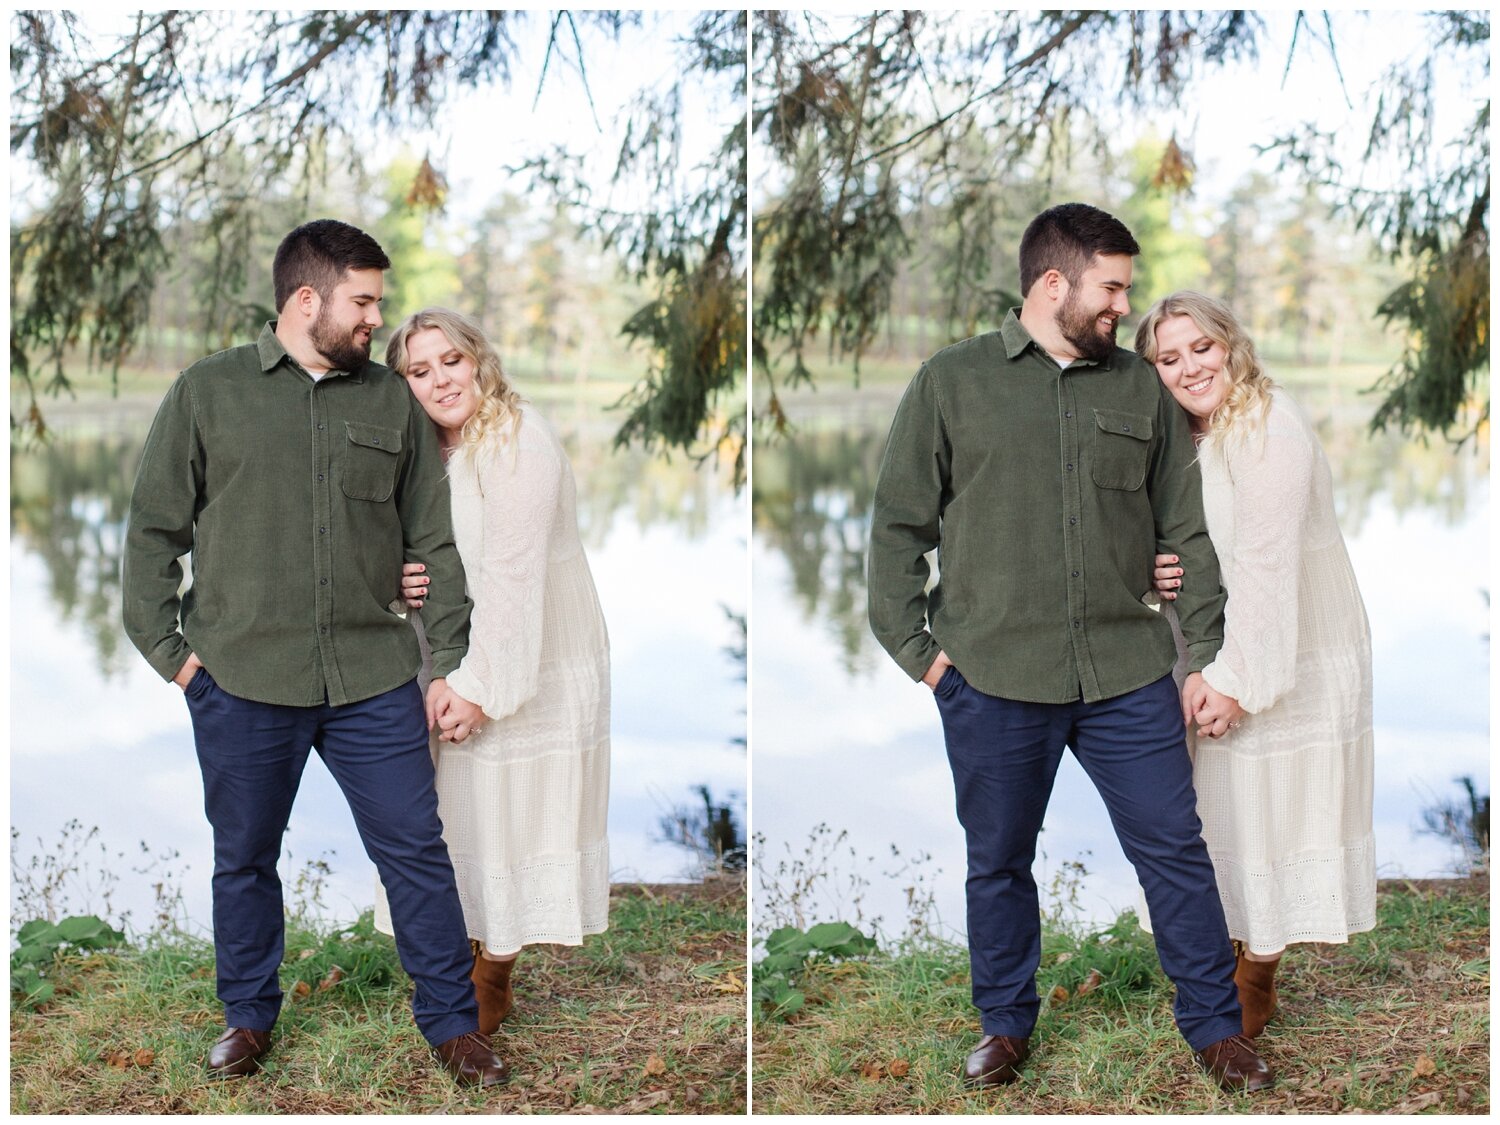 Clarks Summit PA Fall Engagement Session_0002.jpg